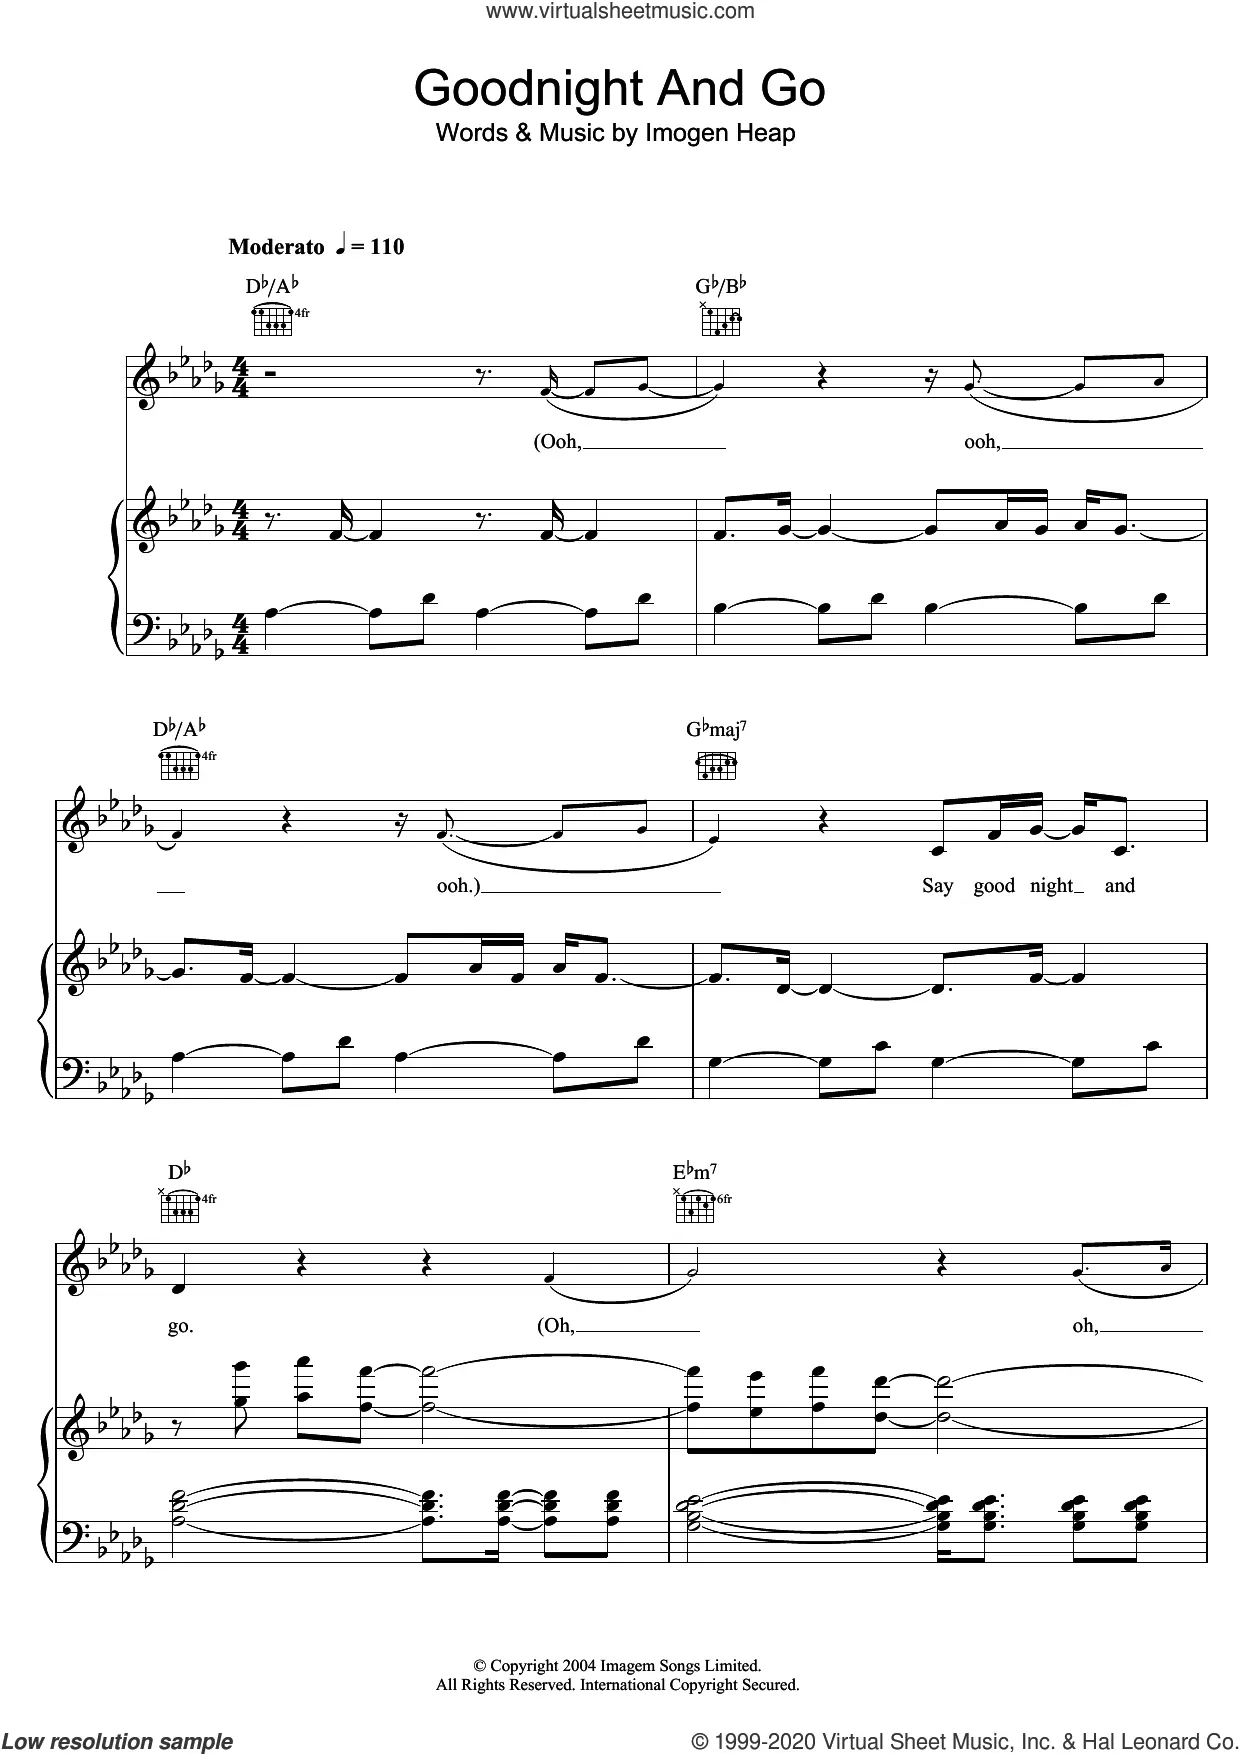 Hide And Seek SATB A Cappella Sheet music for Soprano, Alto, Tenor, Bass  voice (Choral)